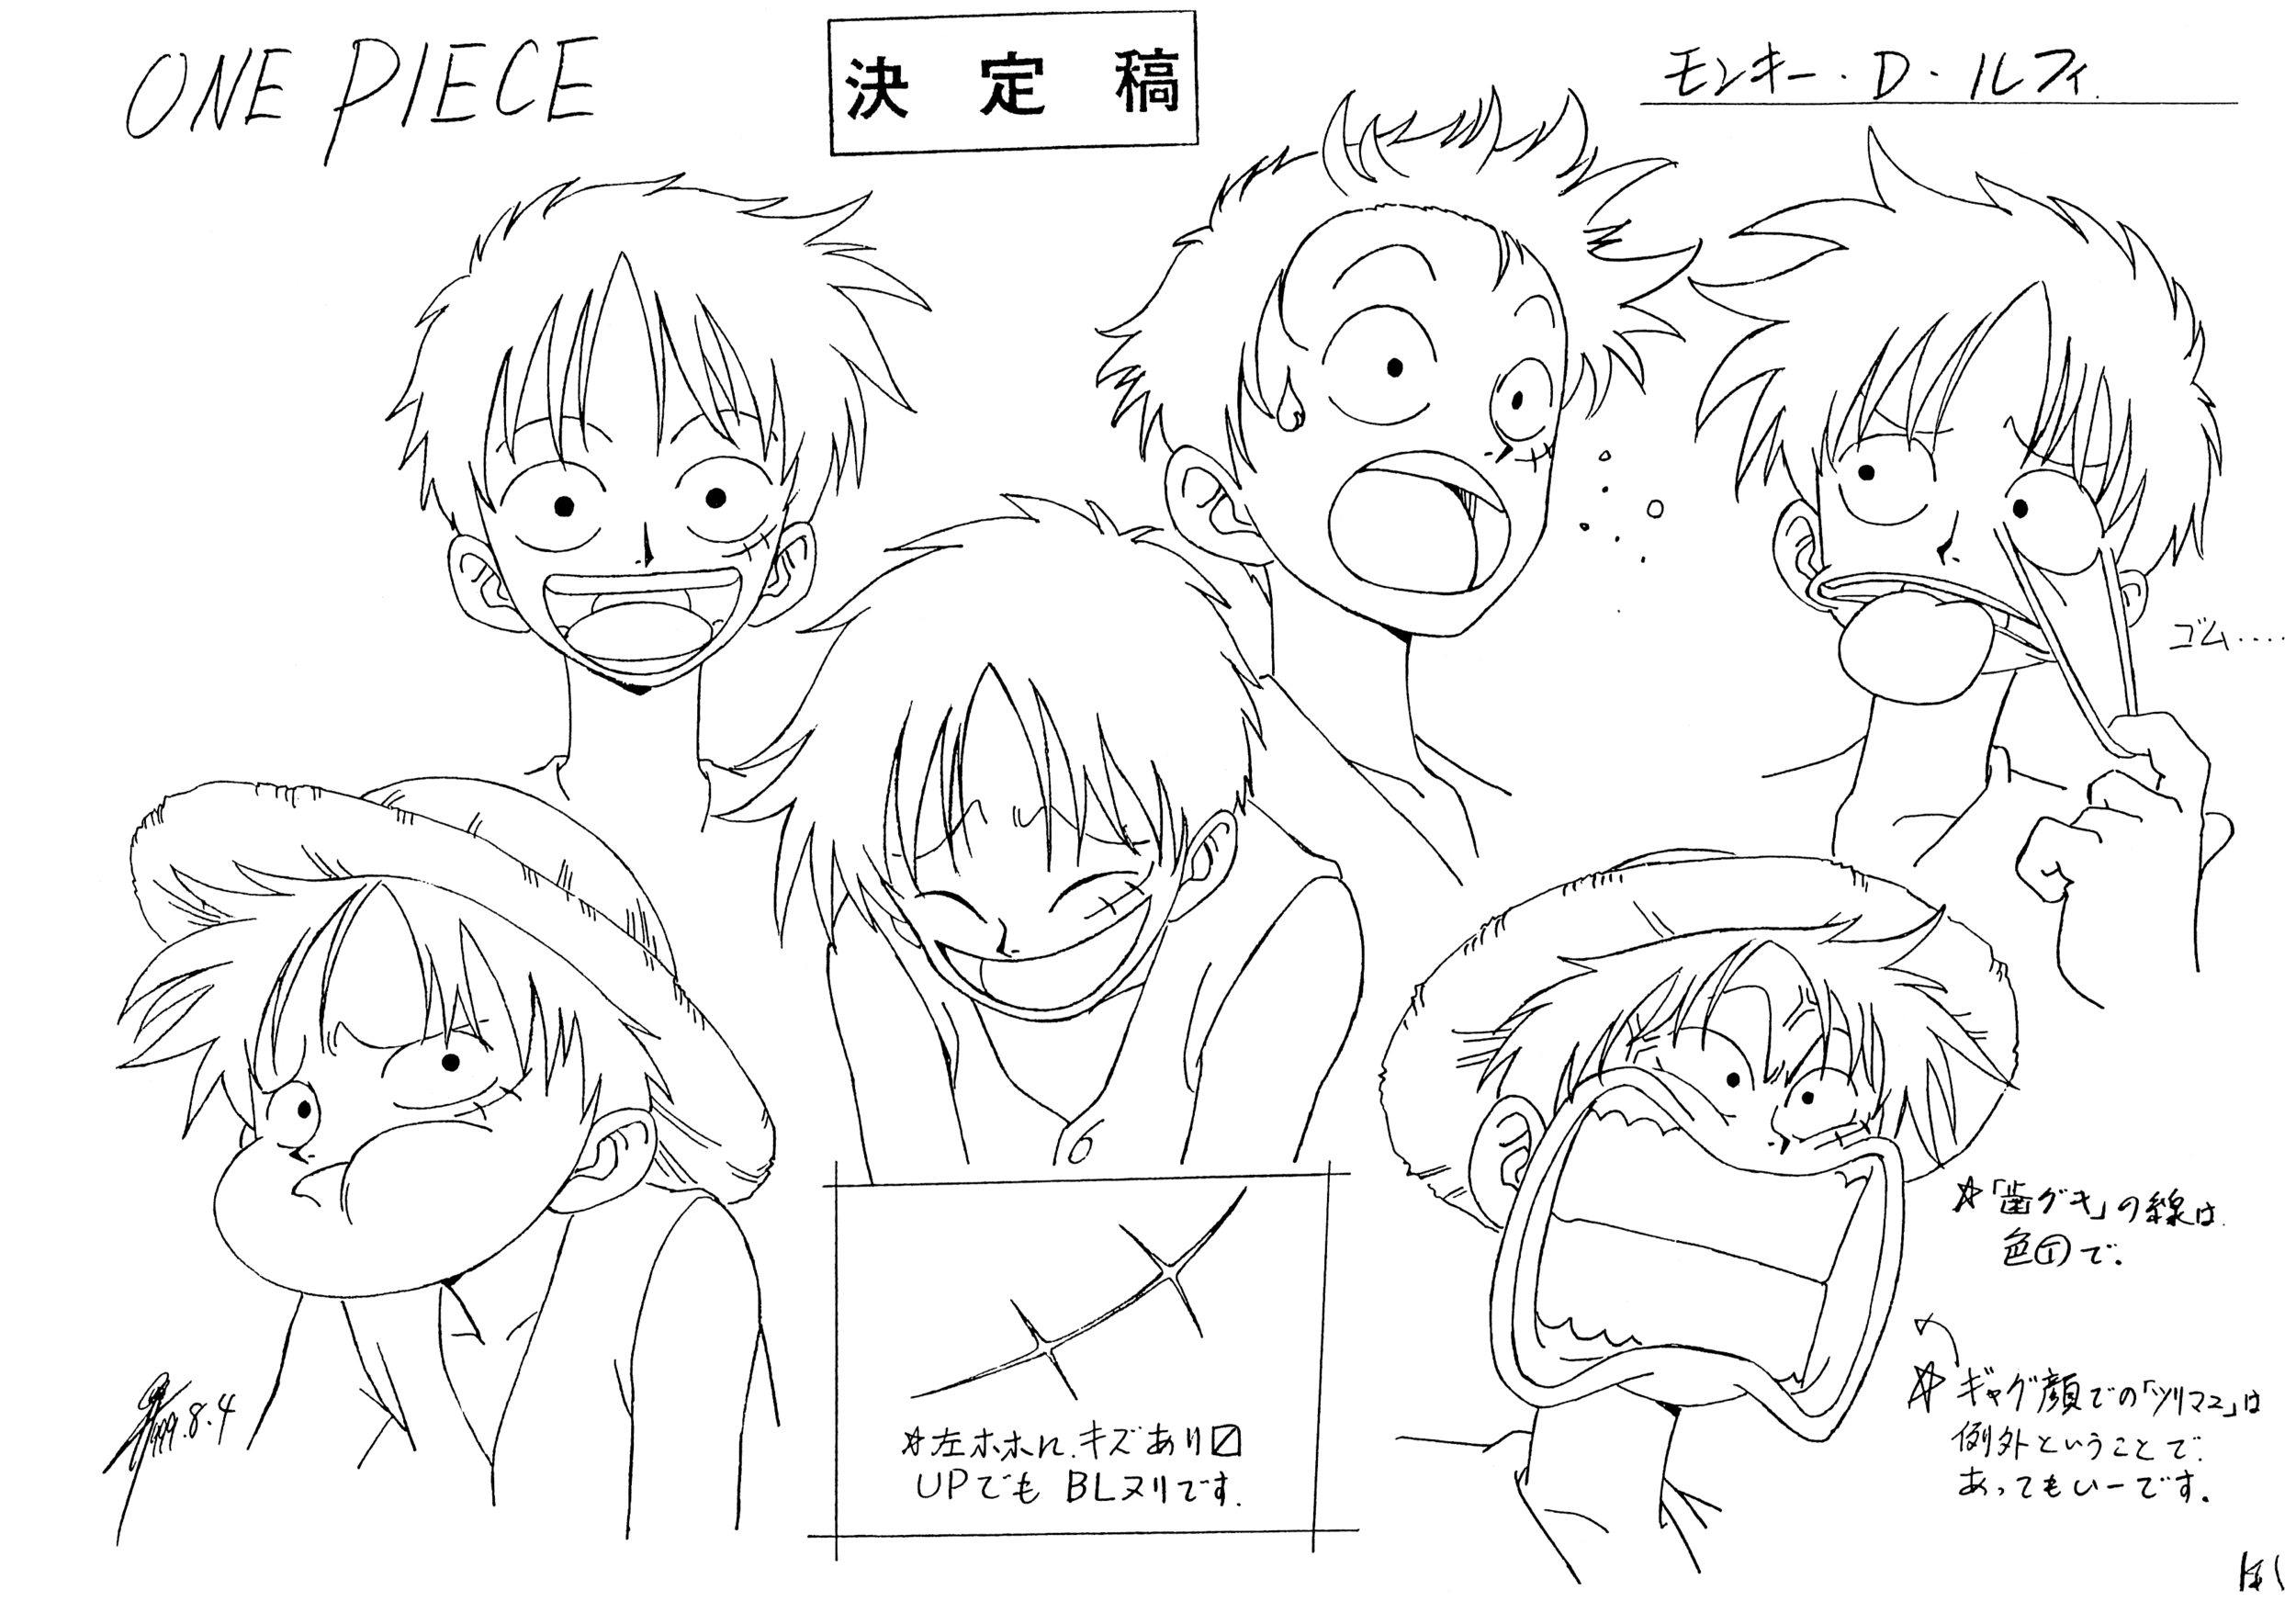 Speed drawing anime  Monkey D Luffy One Piece  Drawings Anime Cool  anime pictures